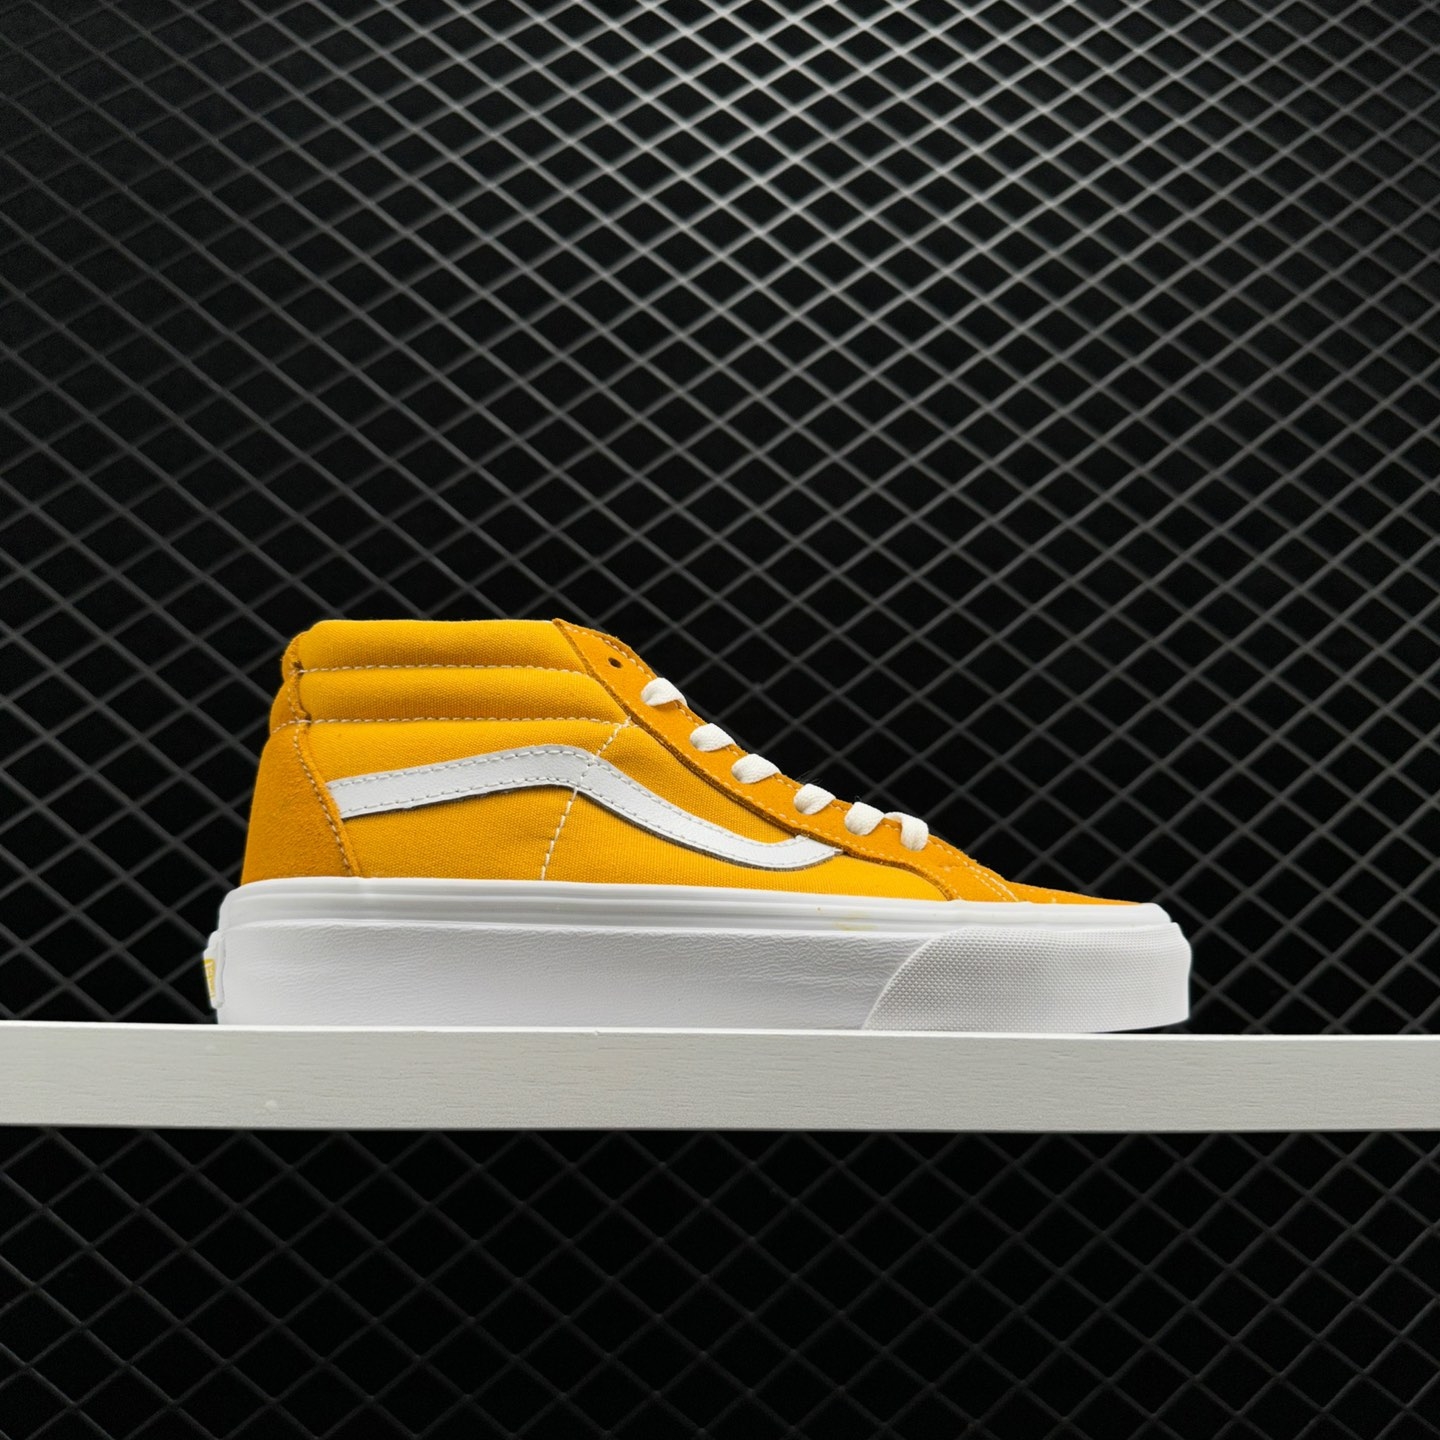 Vans SK8-Mid Yellow VN0A391FTOX - Stylish Mid-Top Sneakers for Men & Women